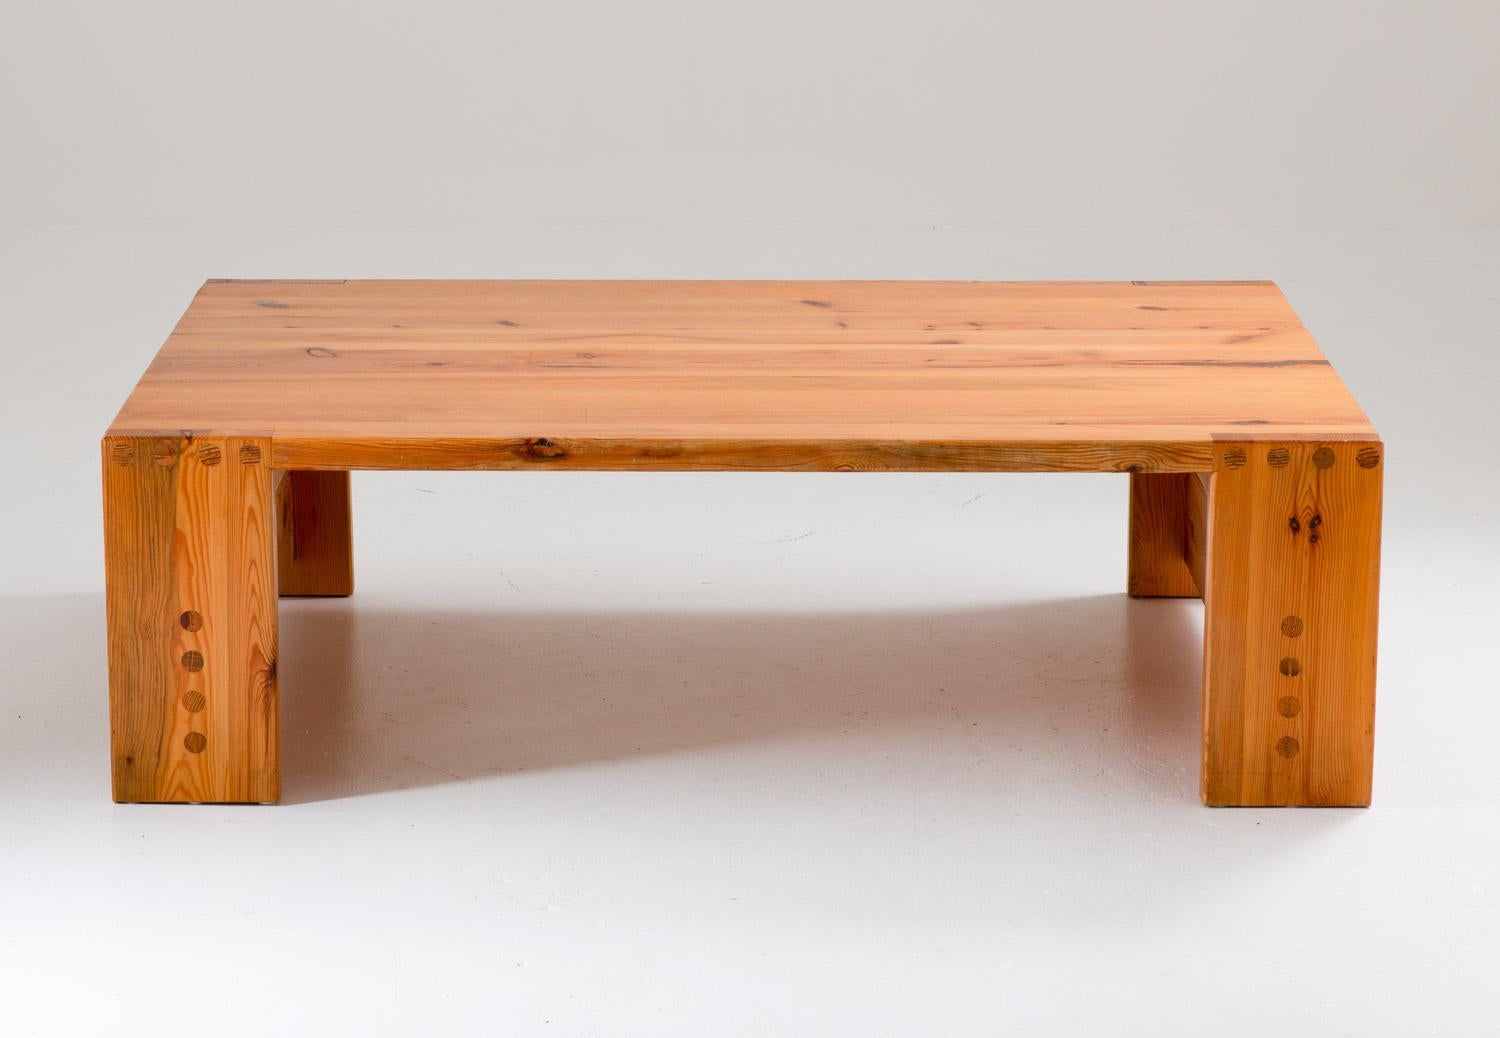 Rare coffee table in pine by Sven Larsson, Sweden, circa 1970. 
This table is a great example of the robust pine furniture era that grew popular in Sweden in the late 1960s. The table is made of thick solid pine with beautiful